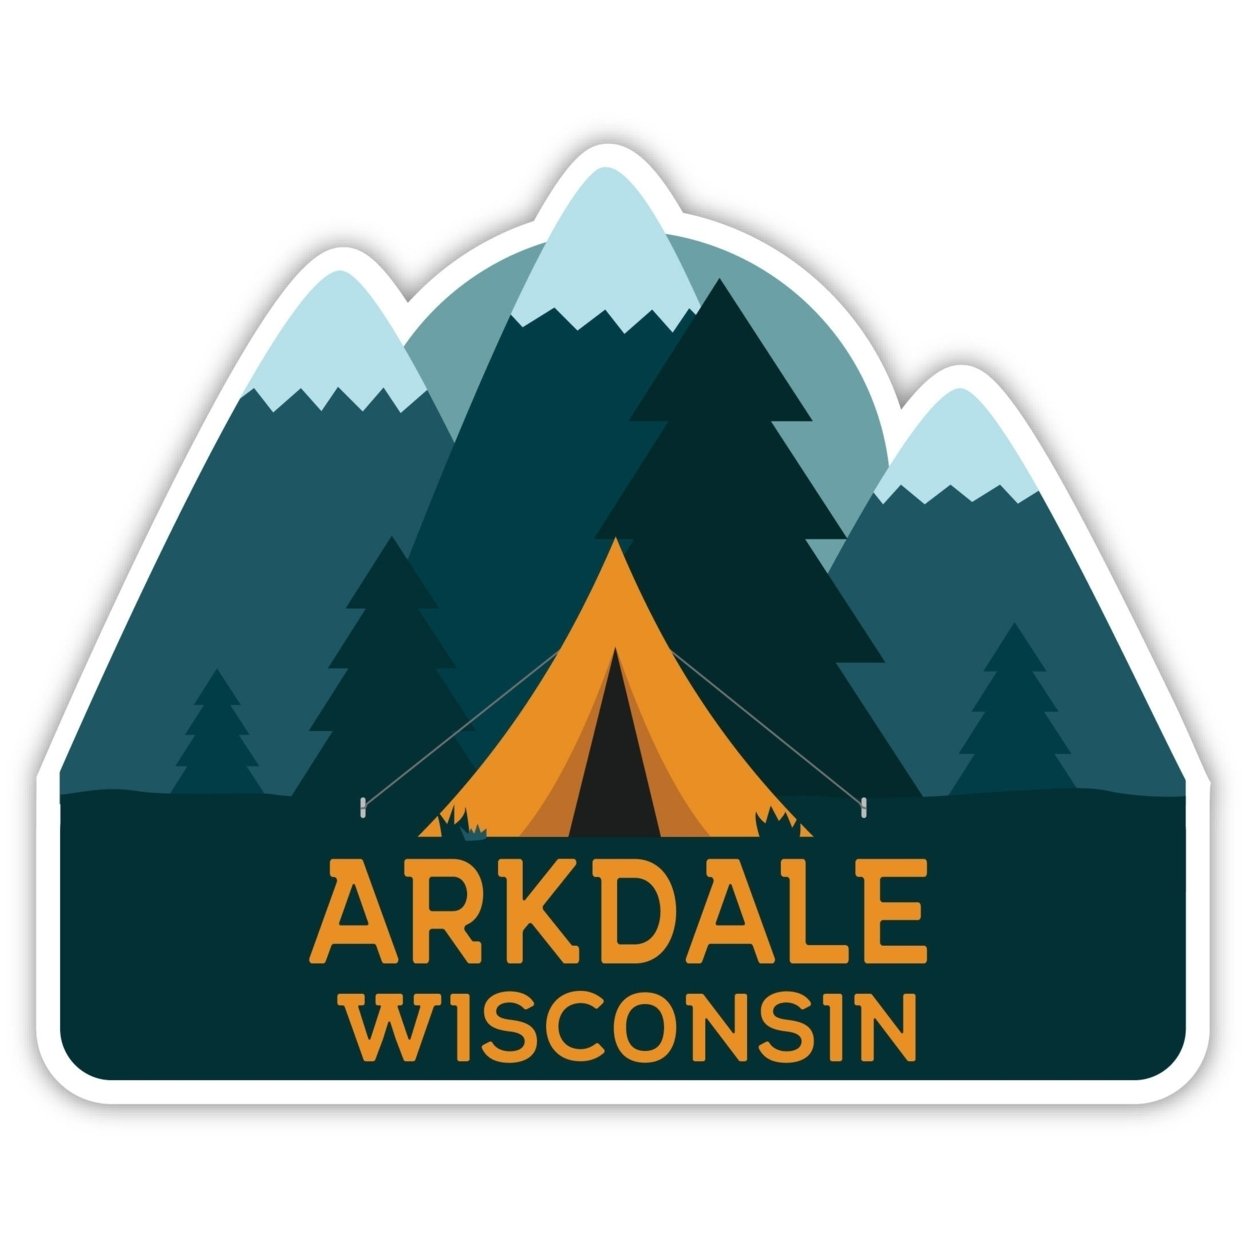 Arkdale Wisconsin Souvenir Decorative Stickers (Choose Theme And Size) - 4-Pack, 12-Inch, Tent